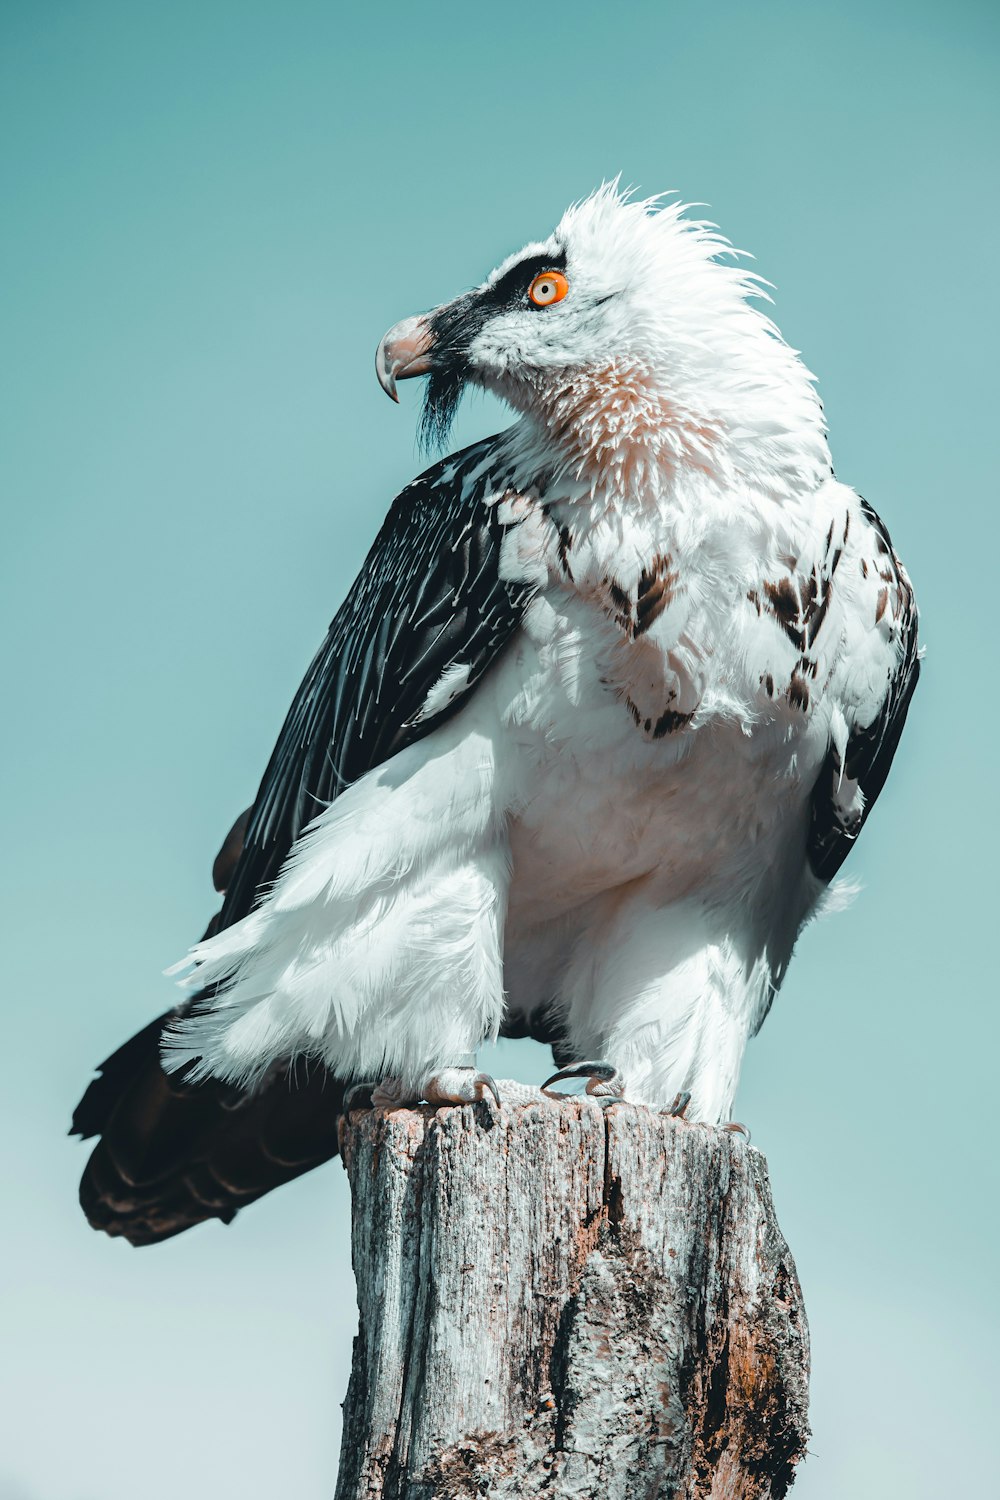 a white and black bird sitting on top of a wooden post